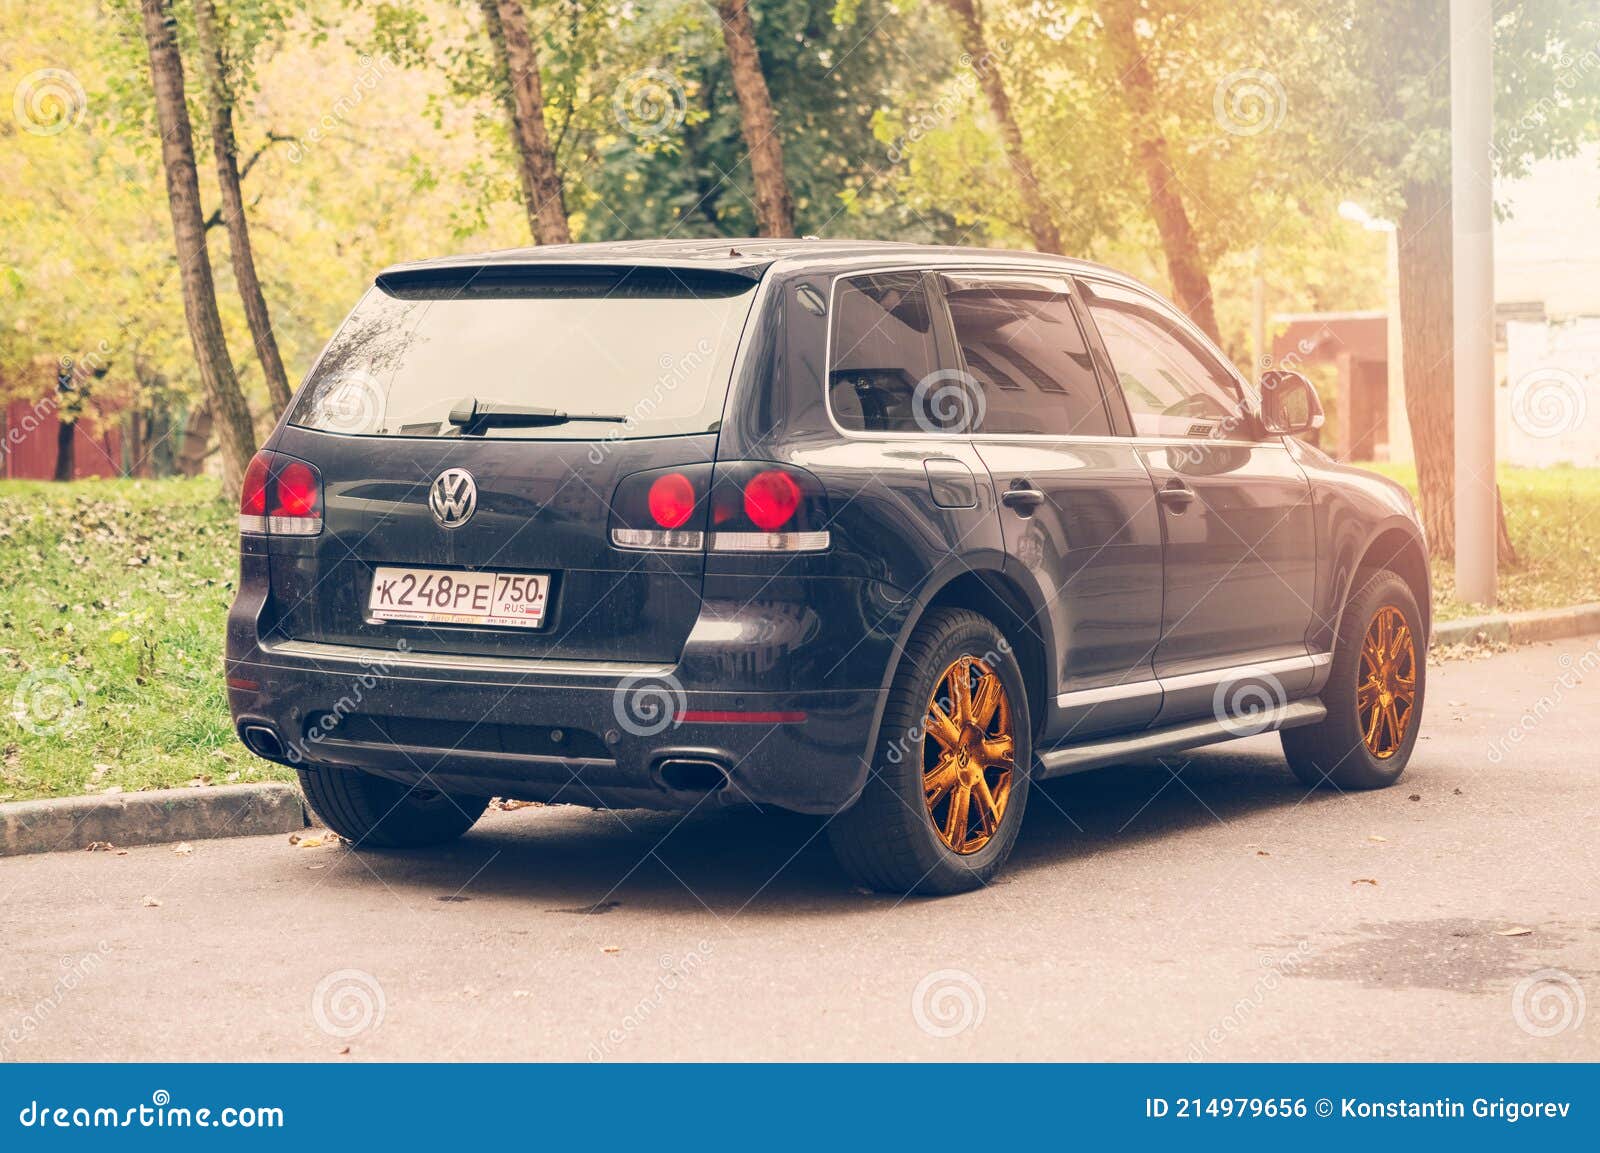 https://thumbs.dreamstime.com/z/moscow-russia-april-vw-touareg-l-stunning-dark-blue-body-color-golden-wheels-rear-view-old-volkswagen-touareg-parked-214979656.jpg